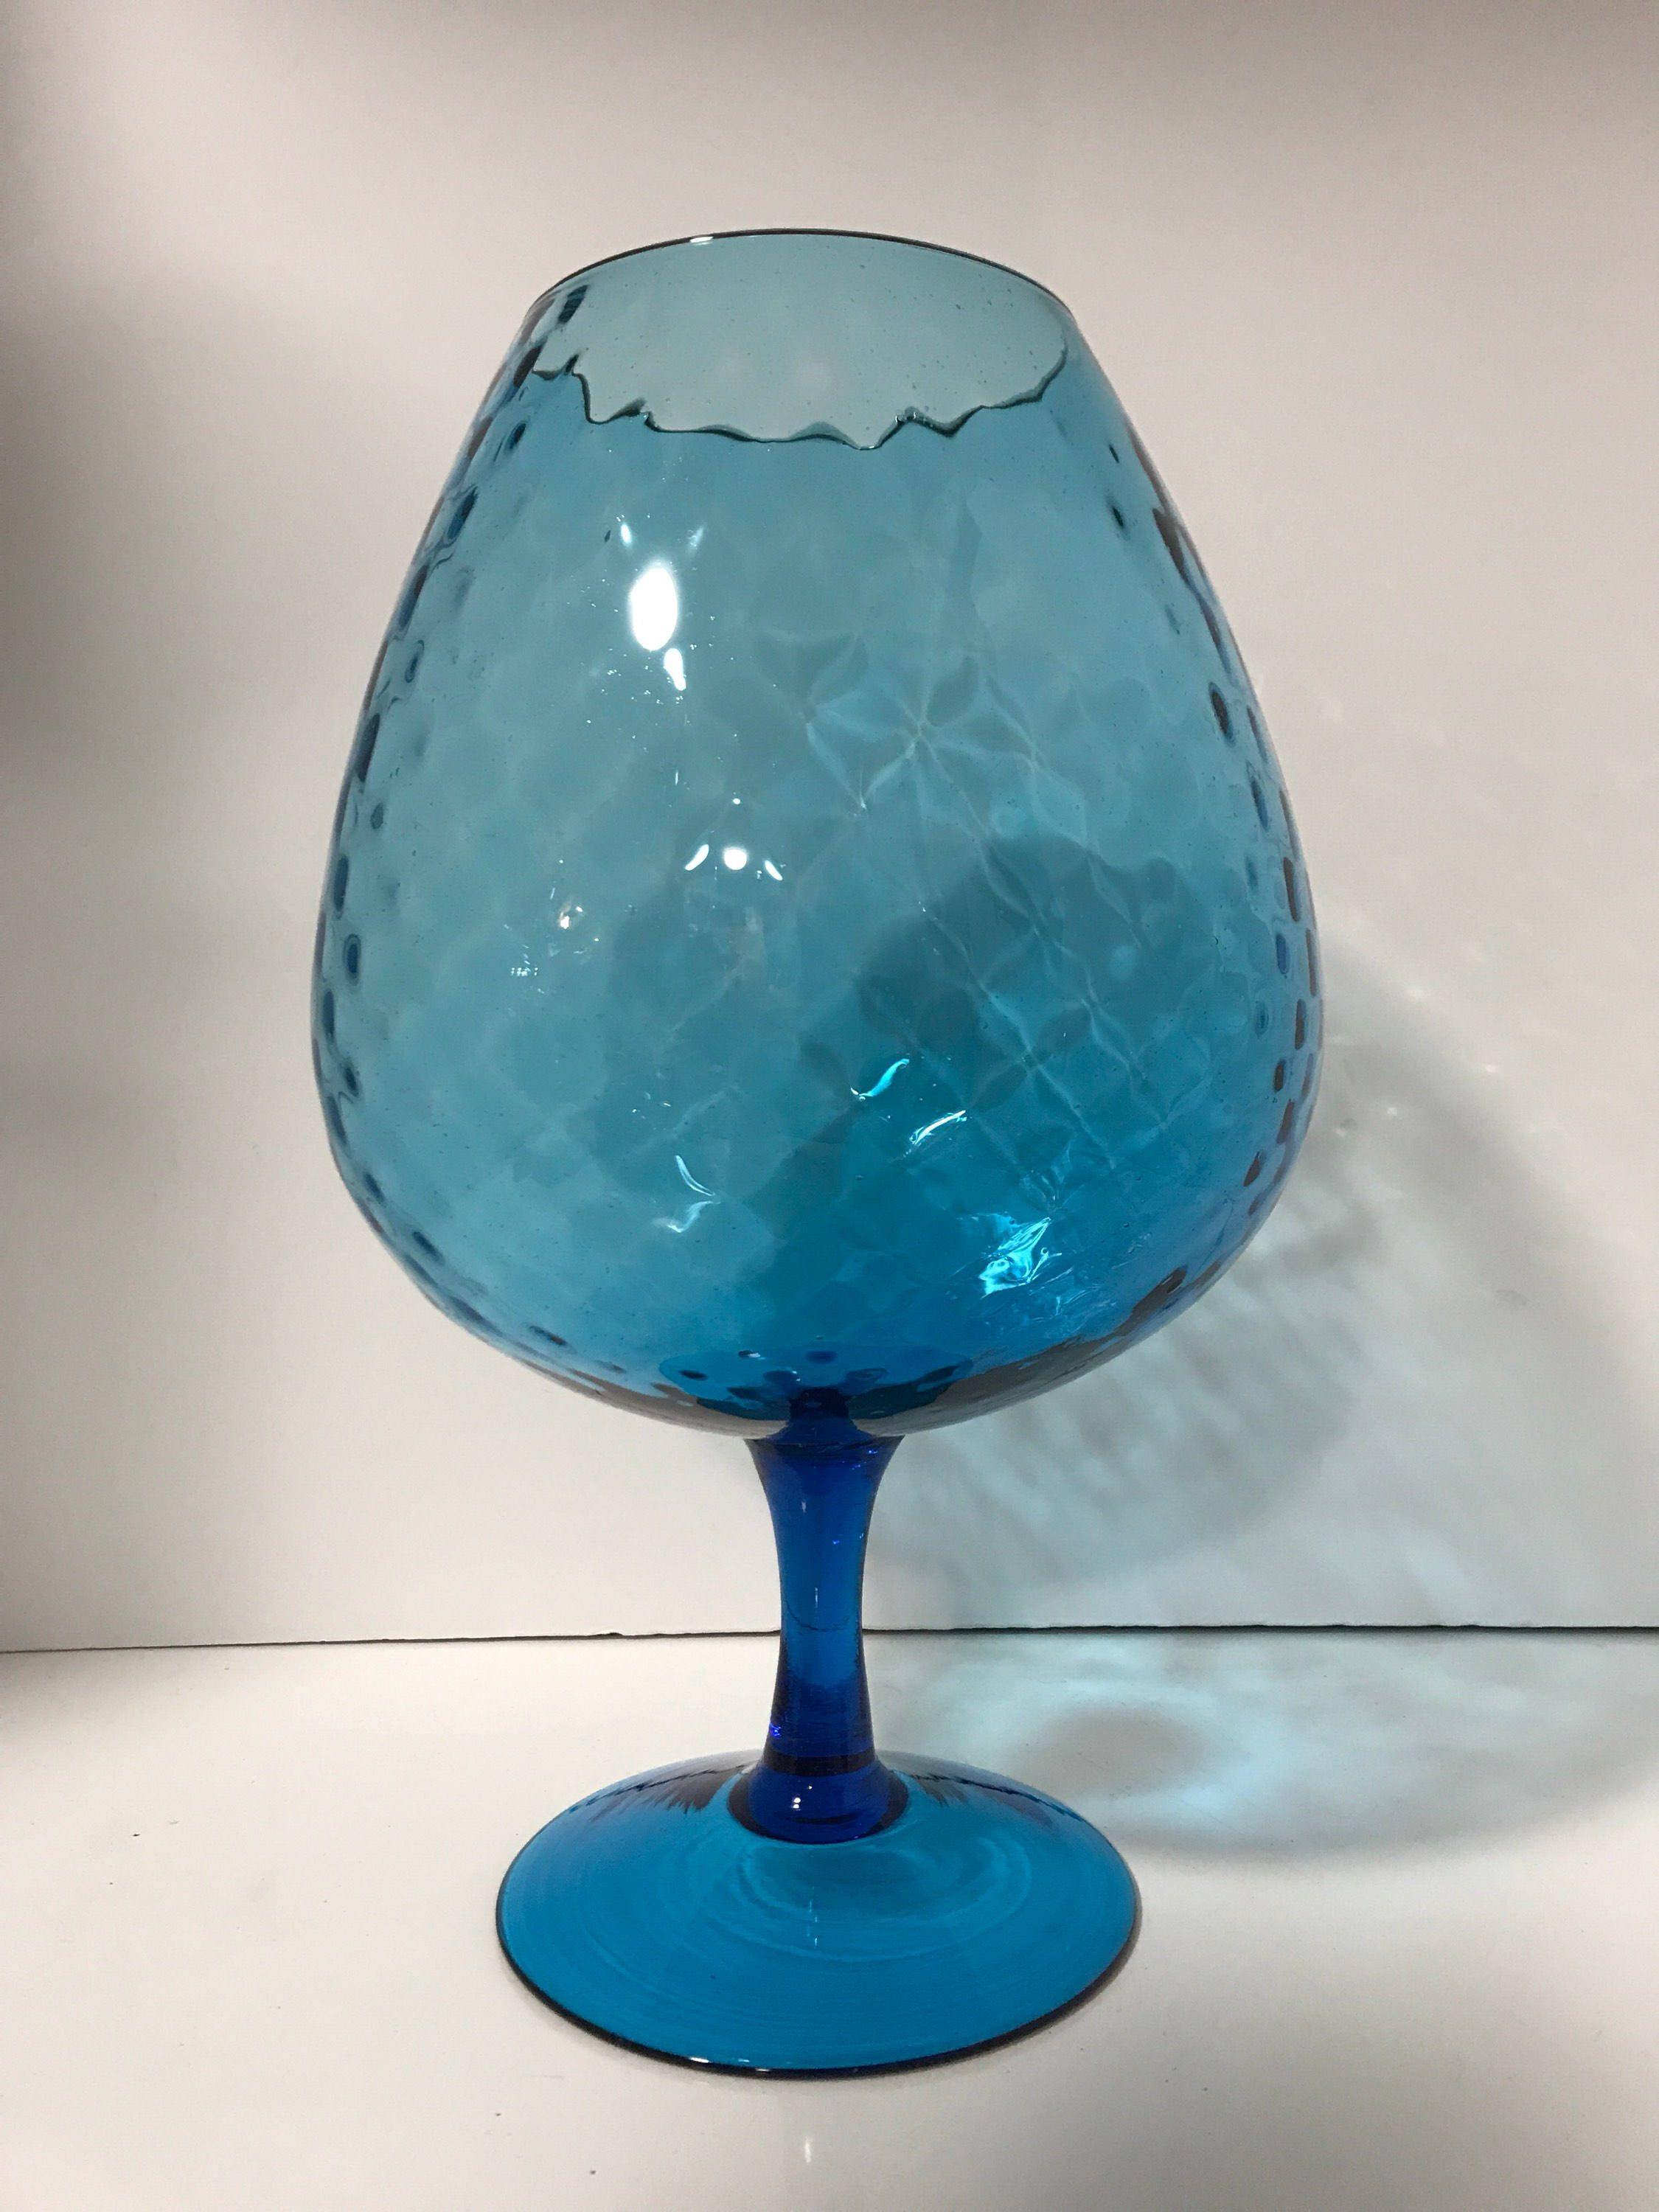 extra large brandy glass vase of vintage blue empoli glass snifter style vase blue diamond optic with a personal favorite from my etsy shop https www etsy com listing 589594501 vintage blue empoli glass snifter style